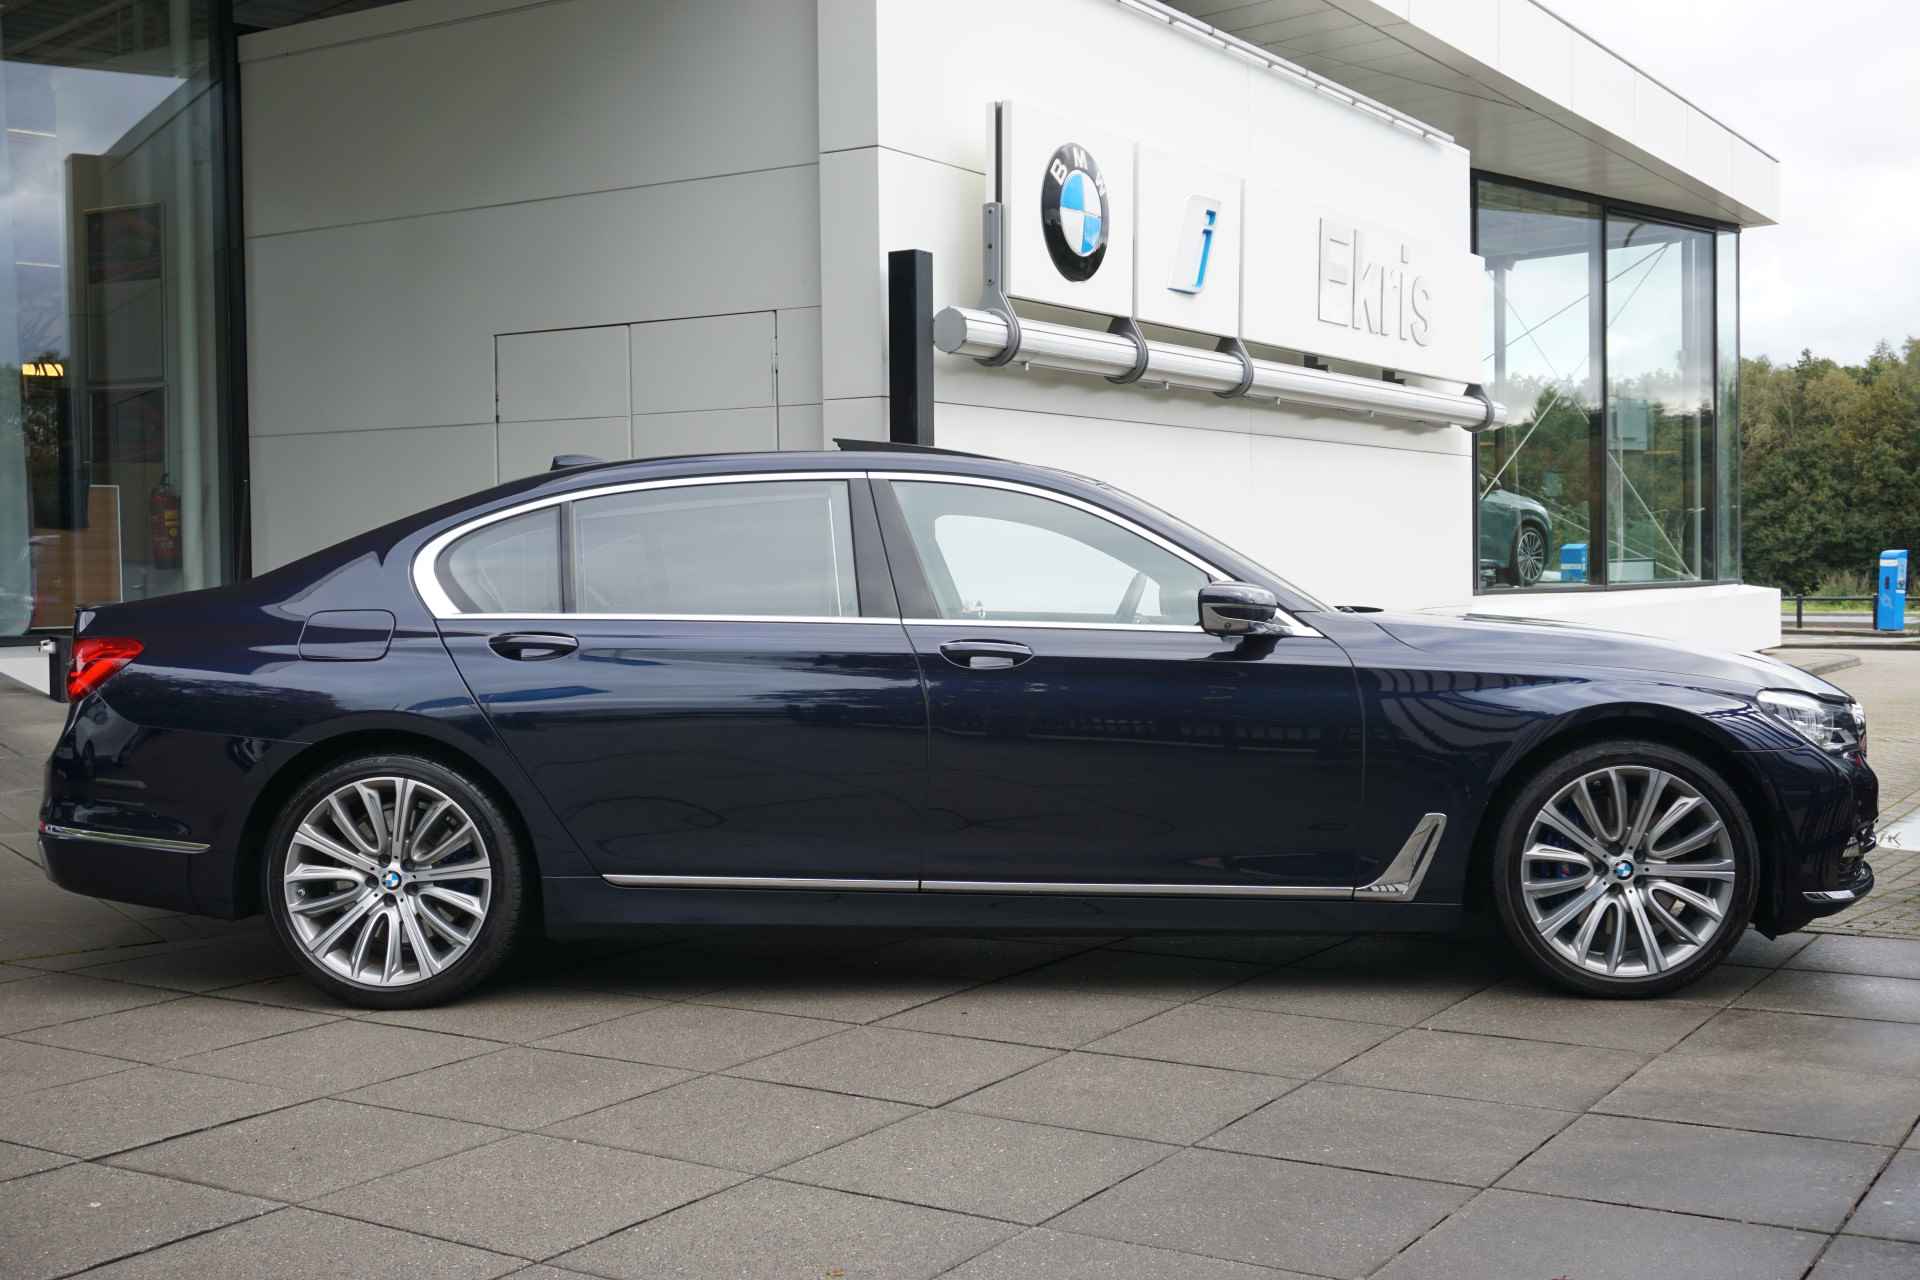 BMW 7 Serie Limousine 750Li xDrive Aut. High Executive / Pure Excellence / B&W Sound / Executive Lounge / Active Steering / Laserlight - 4/47